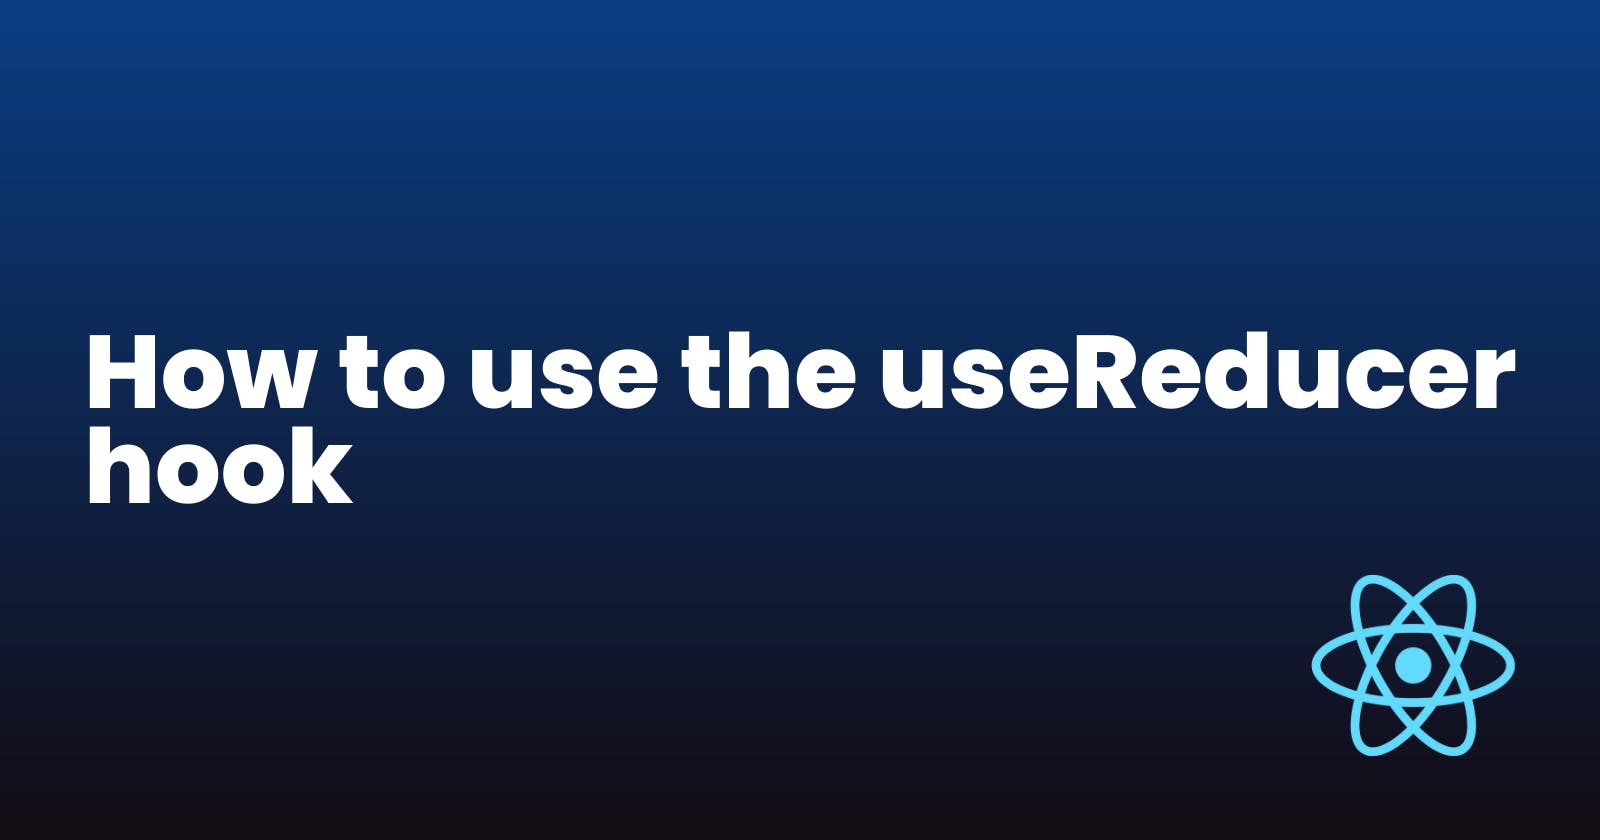 How to use the useReducer hook in React